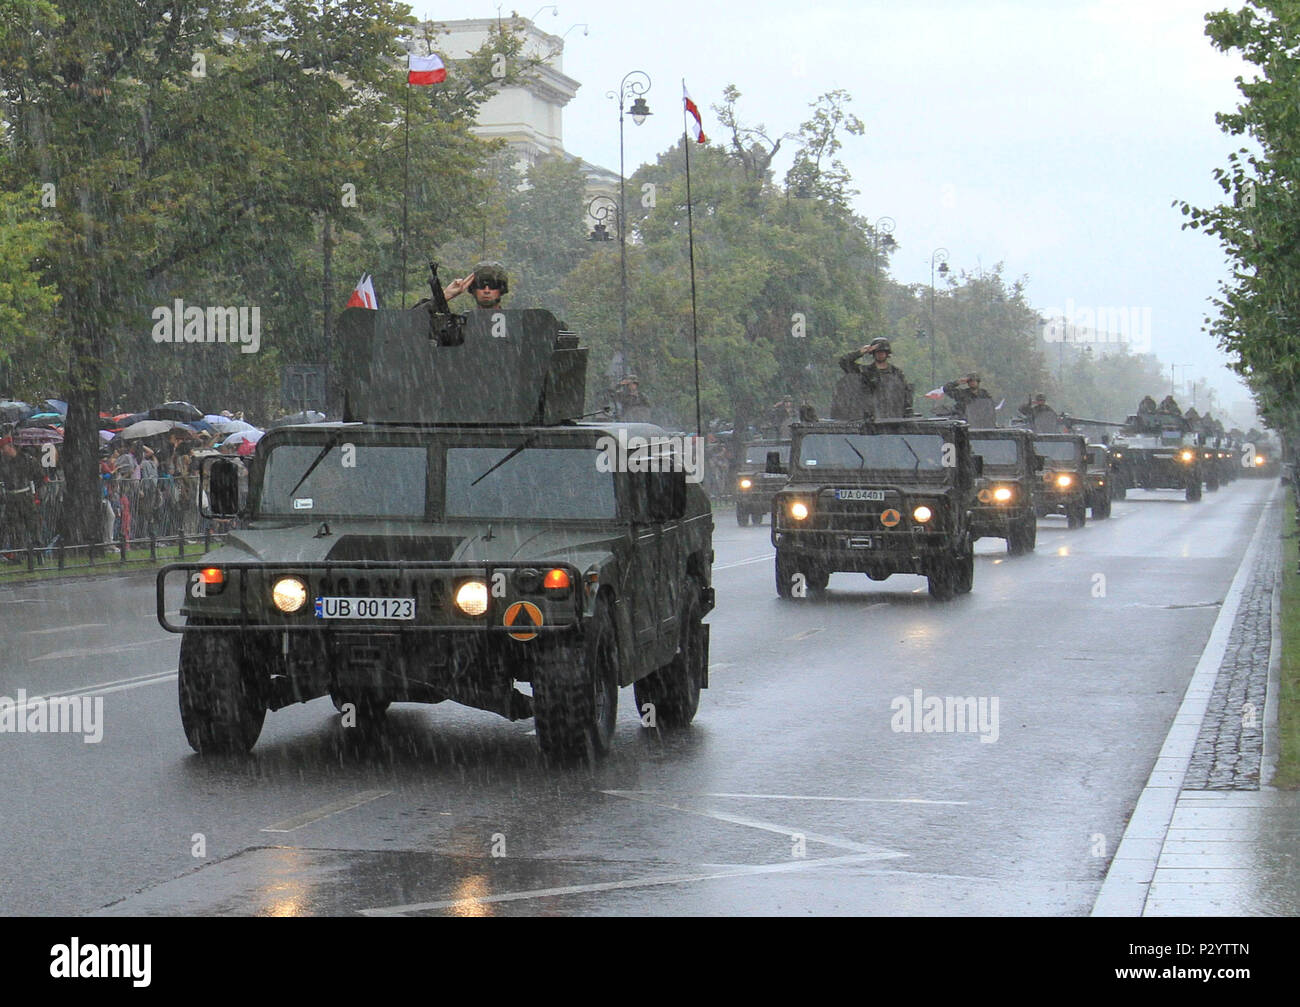 WARSAW, Poland – Polish soldiers salute from military vehicles during the Armed Forces Day Parade in Warsaw, Poland, Aug. 15, 2016. The parade, held annually in the capital, commemorates the 96th anniversary of the Polish victory over Soviet Russia at the Battle of Warsaw in 1920 during the Polish-Soviet War. The event included participation from over one thousand Polish soldiers and soldiers from several allied countries including U.S. Soldiers of Company D, 3rd Combined Arms Battalion, 69th Armor Regiment, 3rd Infantry Division. (U.S. Army photo by Sgt. Lauren Harrah/Released) Stock Photo